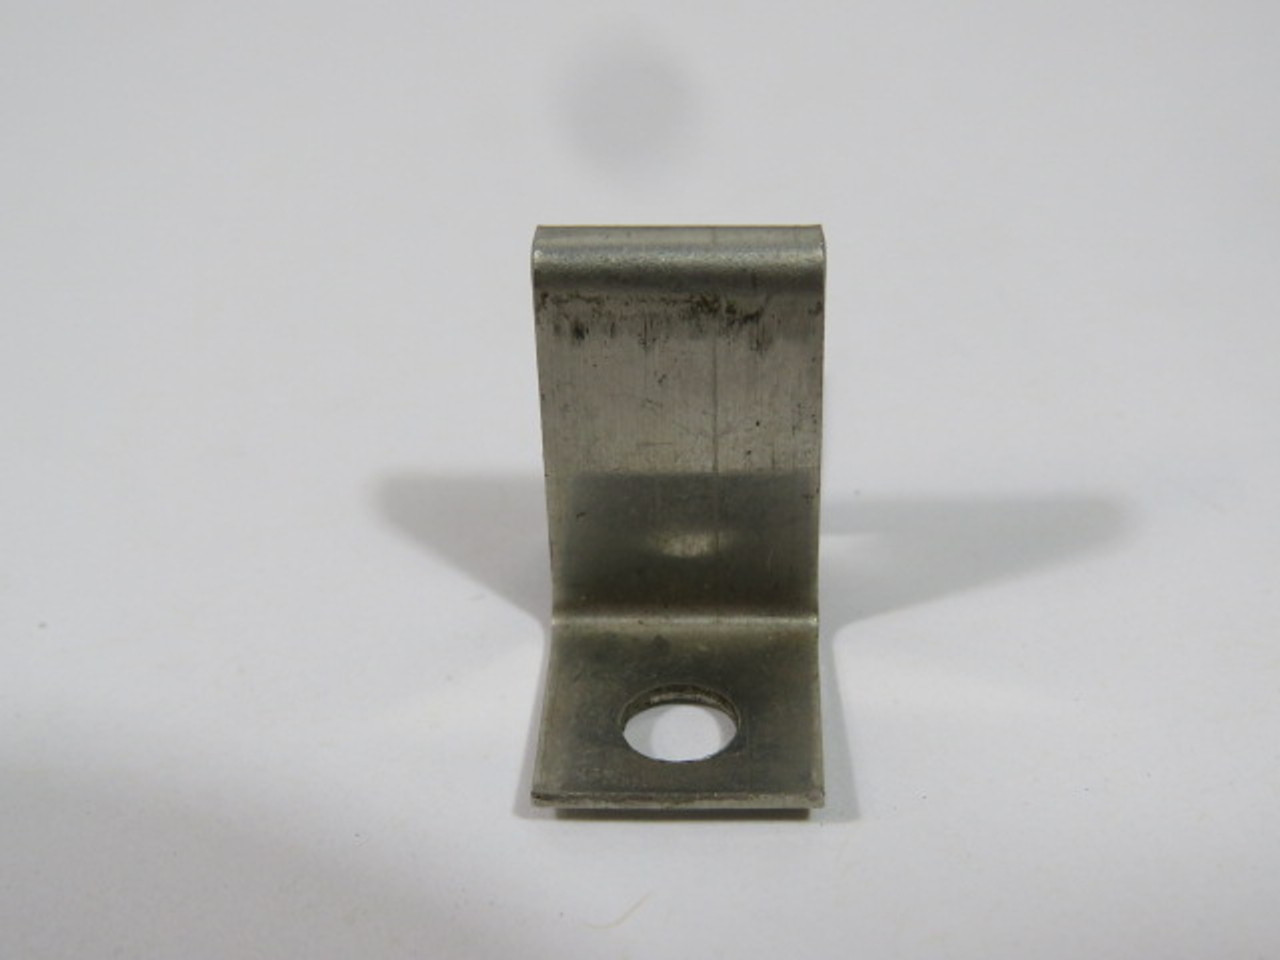 General Electric 81D-562 Overload Relay Heater Element USED